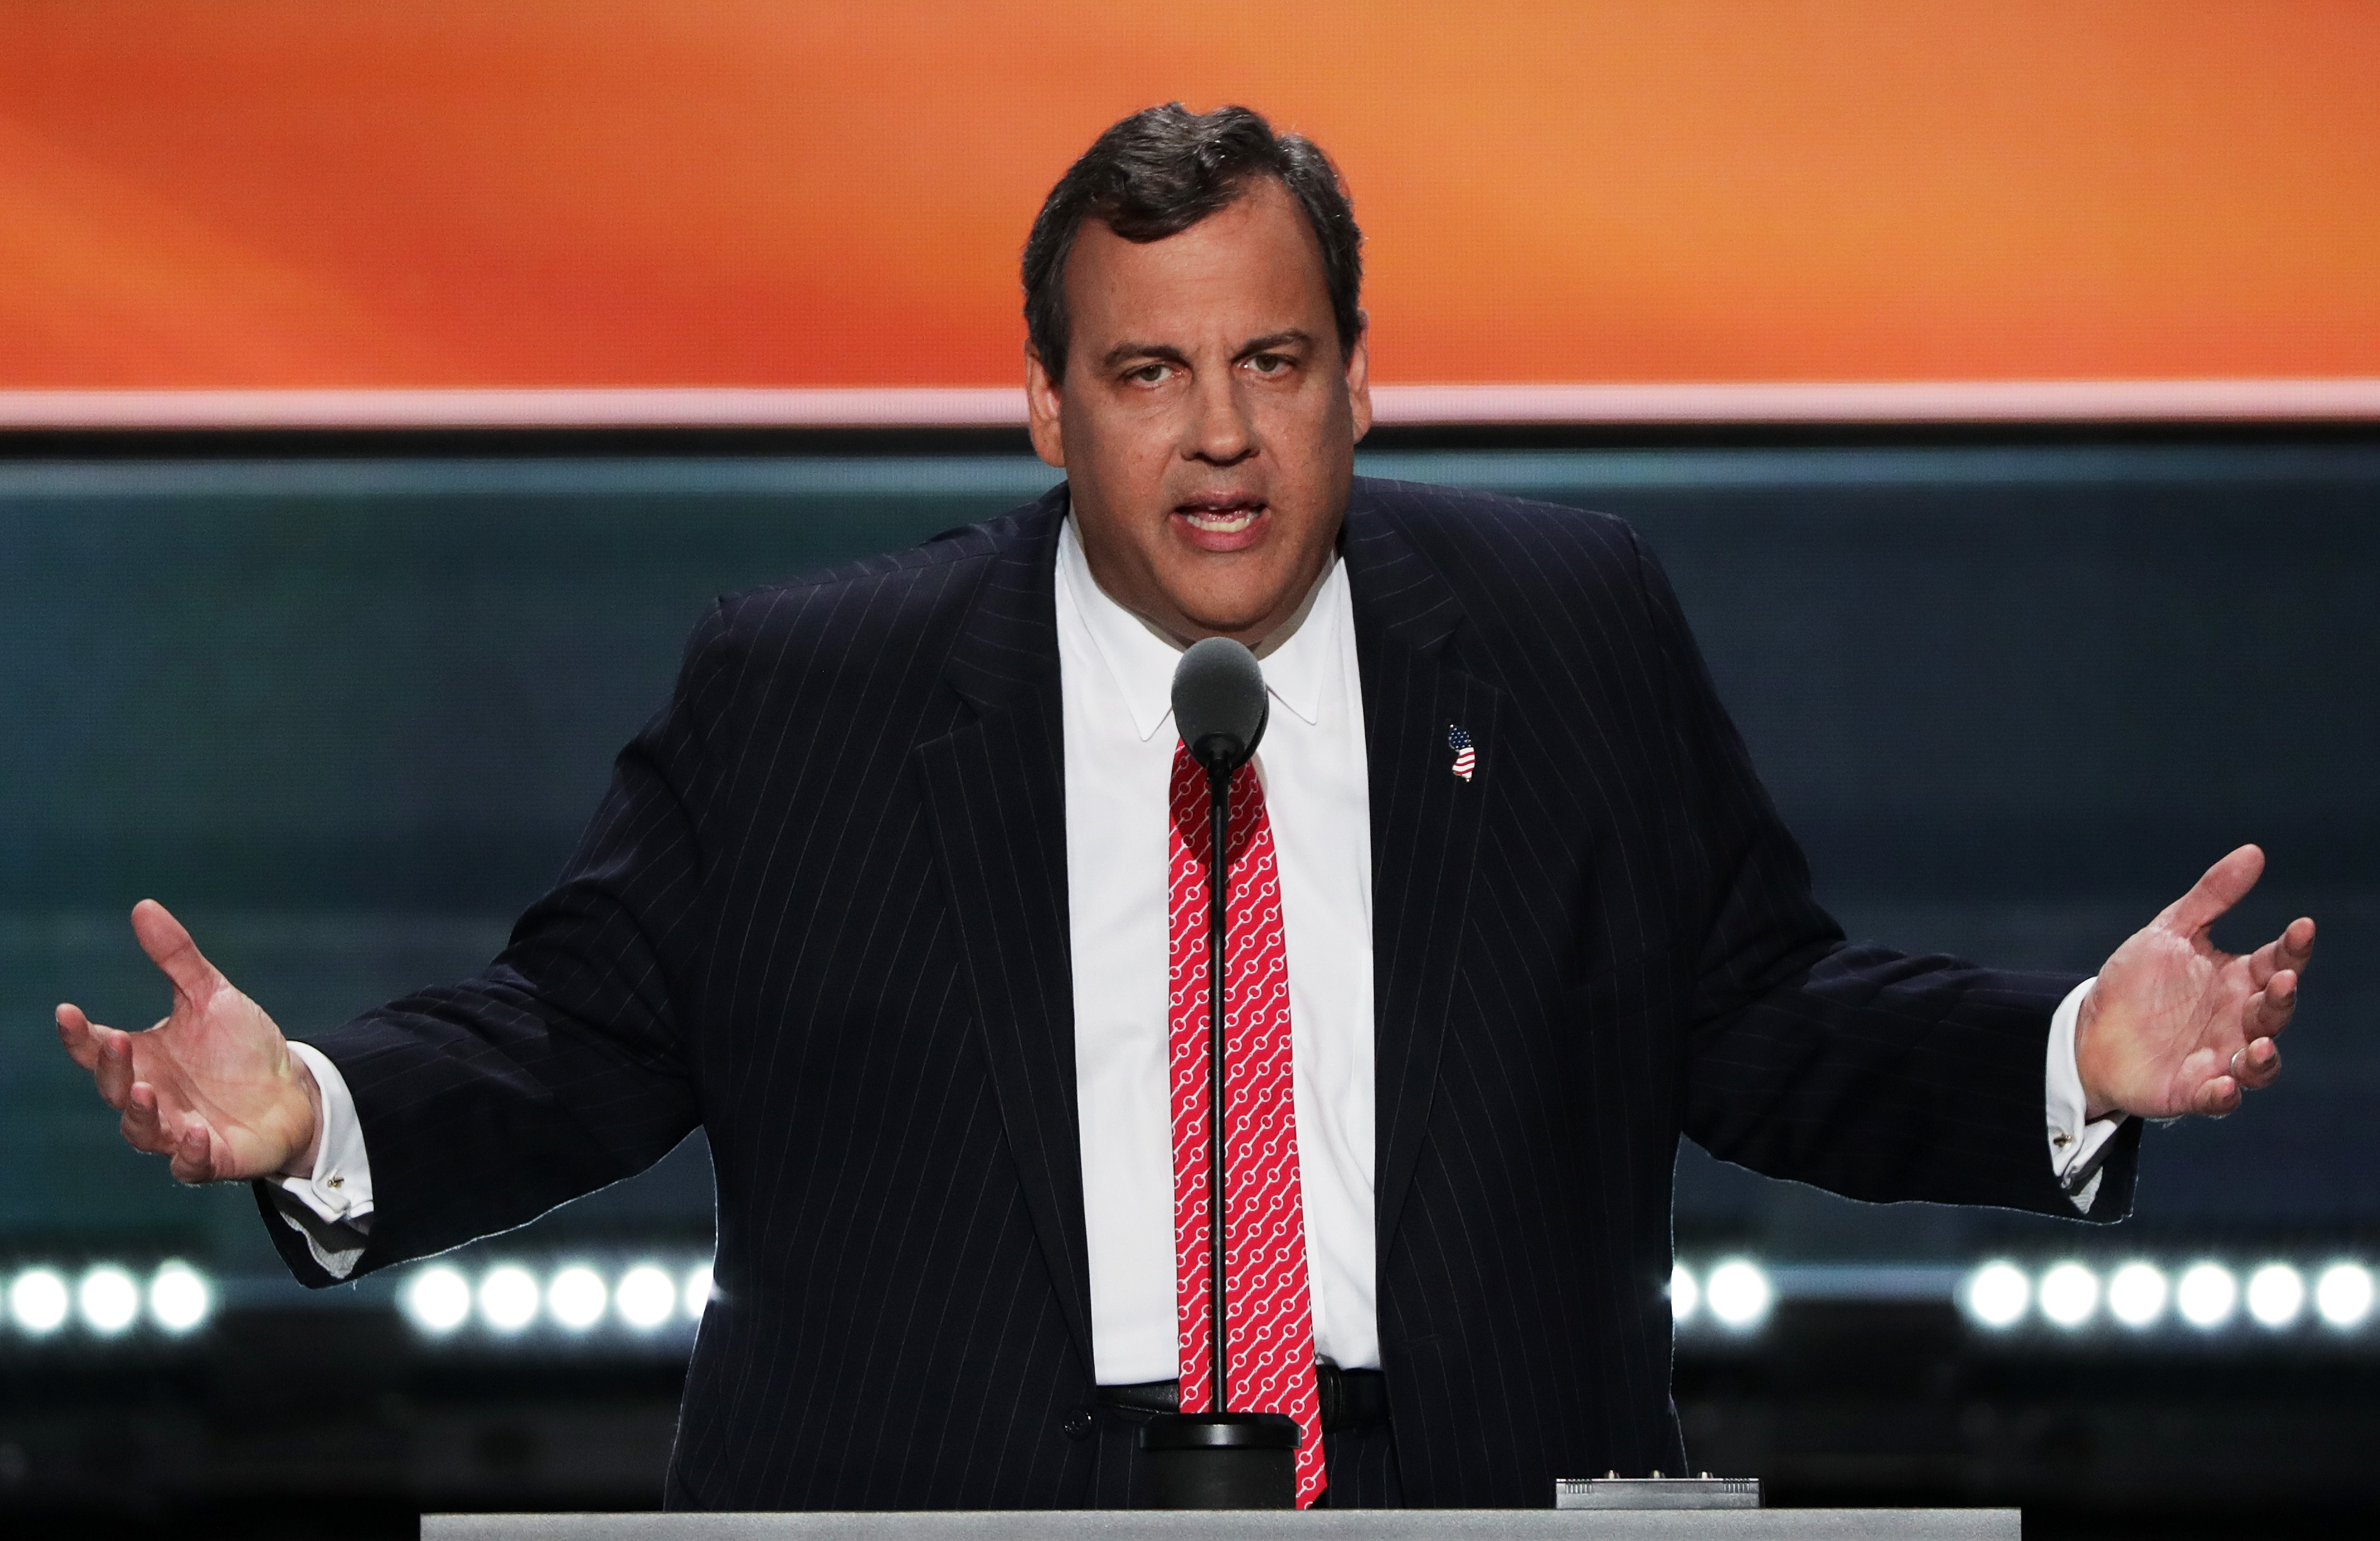 New Jersey Gov. Chris Christie delivers a speech on the second day of the Republican National Convention on July 19, 2016 at the Quicken Loans Arena in Cleveland, Ohio. (Alex Wong—Getty Images)